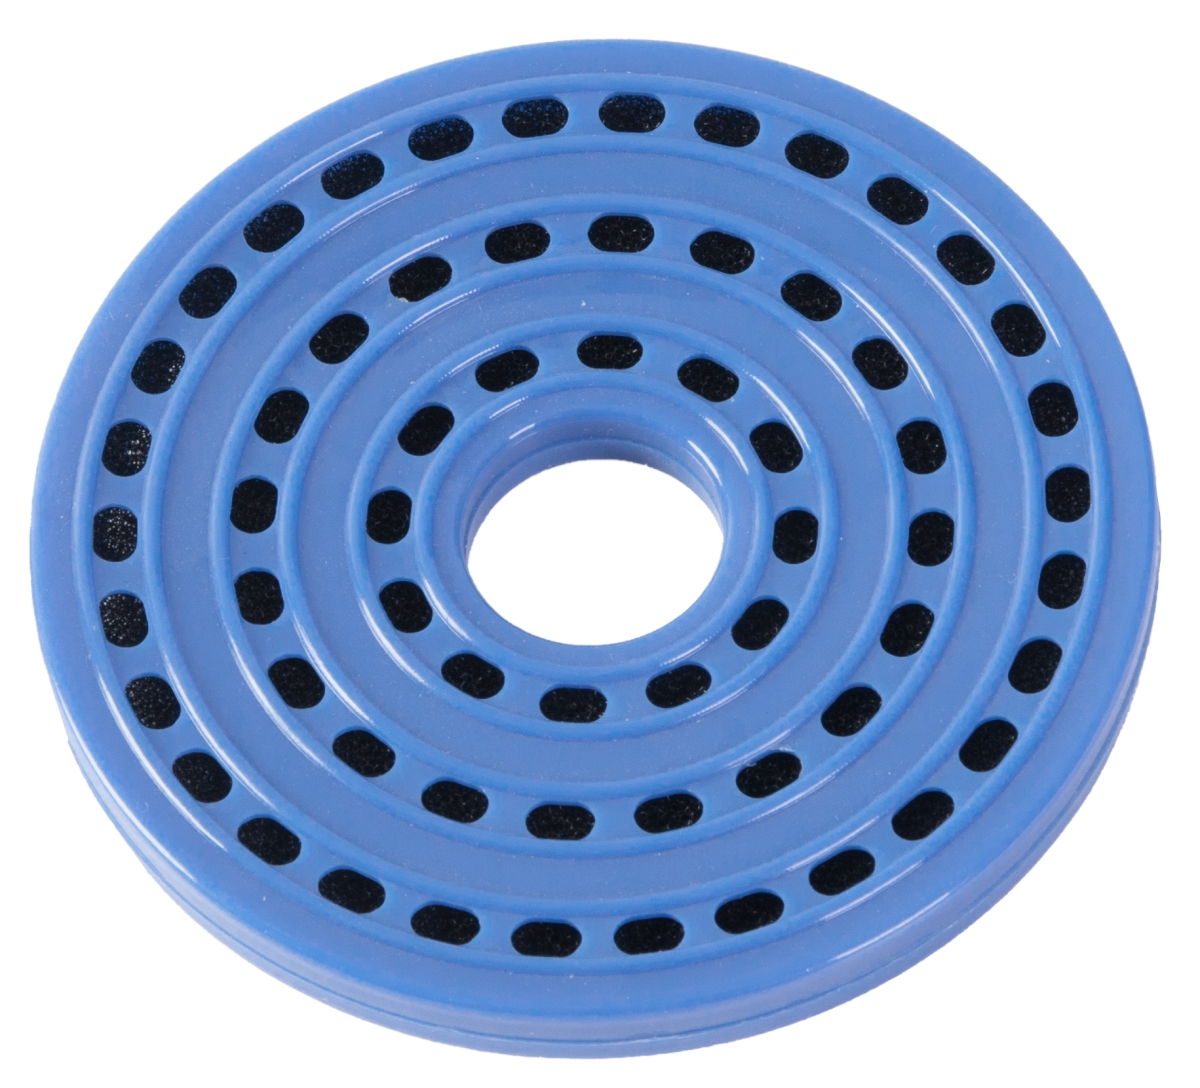 Picture of PawsMark QI003667 3 x 3 x 0.25 in. Replacement Filter for Pet Fountain, Blue